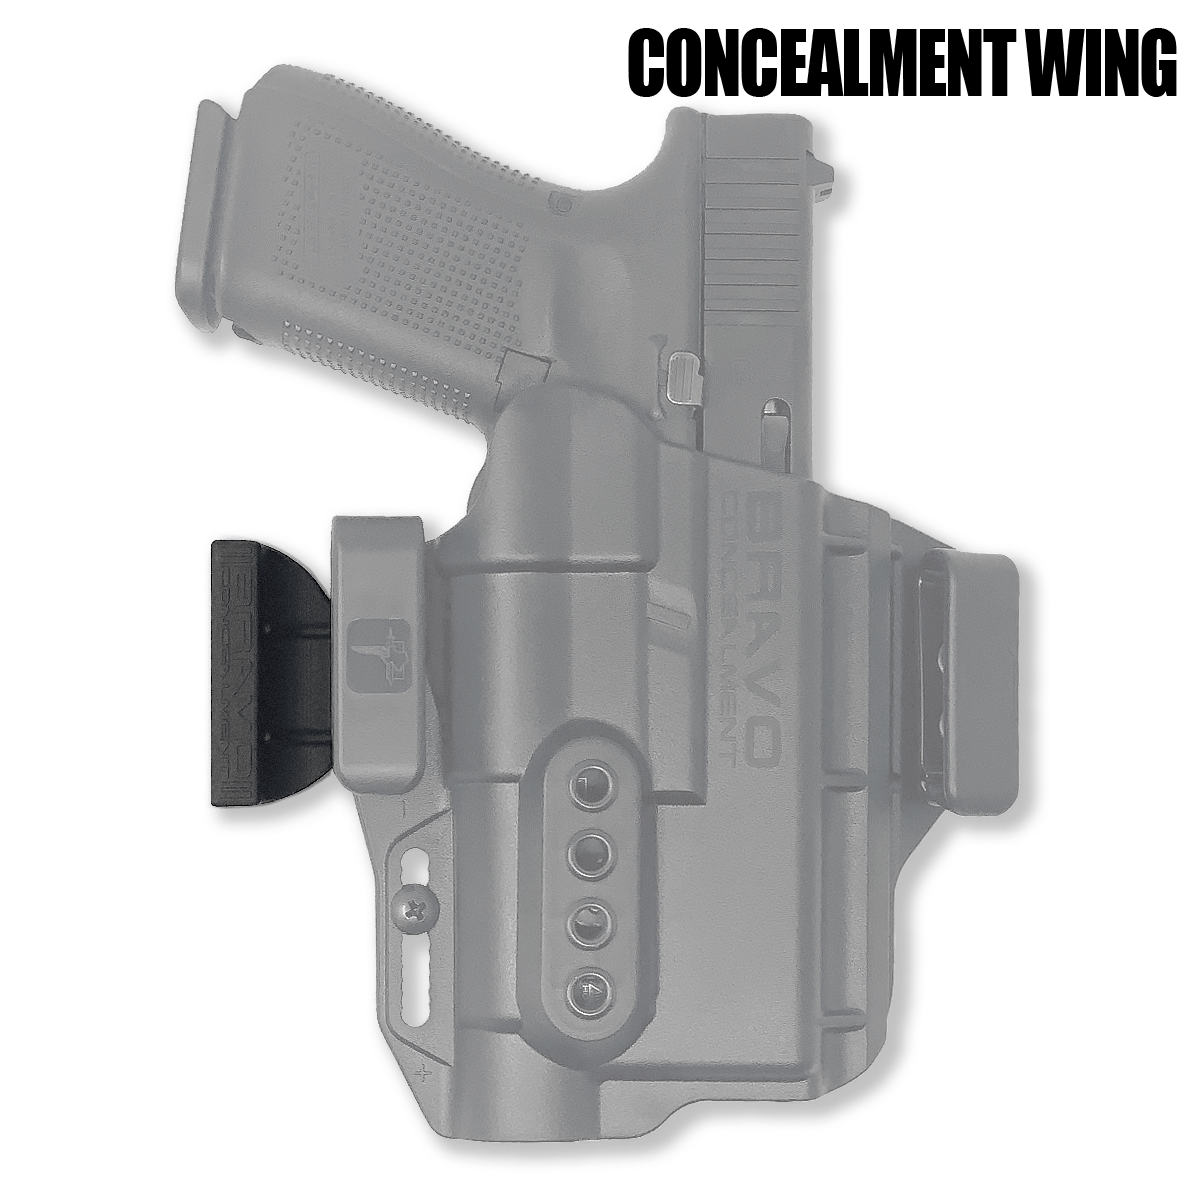 NEW For GLOCK 27 GEN 5 Zero Carry Elite In Waistband Holster for concealed  carry